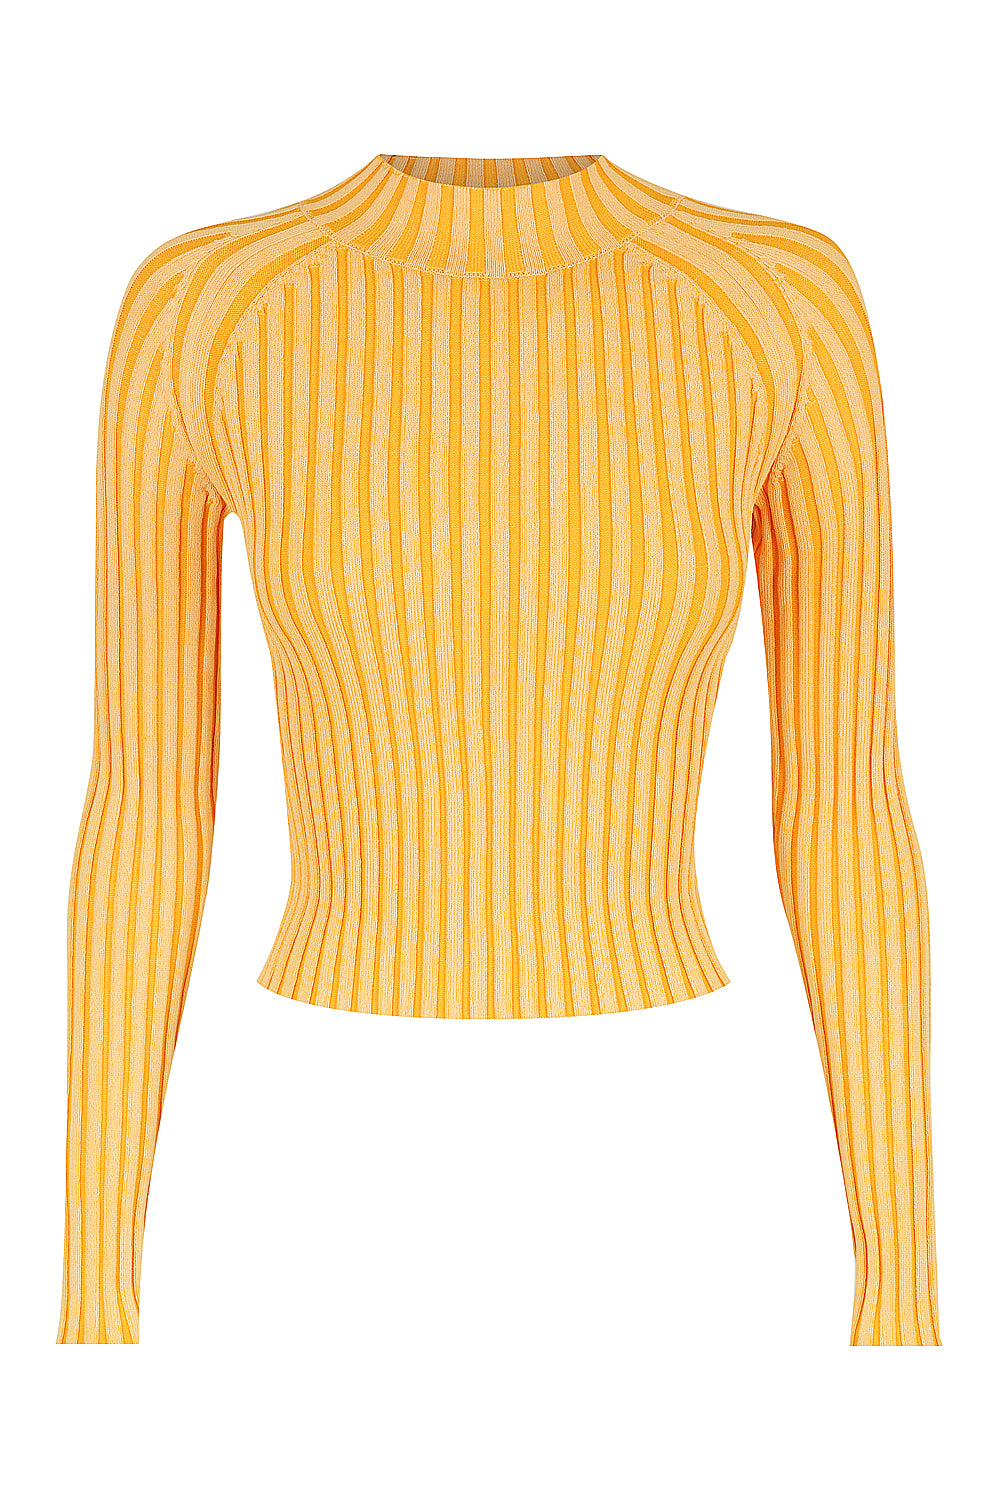 Women’s Yellow / Orange The All Sorts Two-Tone Knit Top - Orange Crush Small St Cloud Label